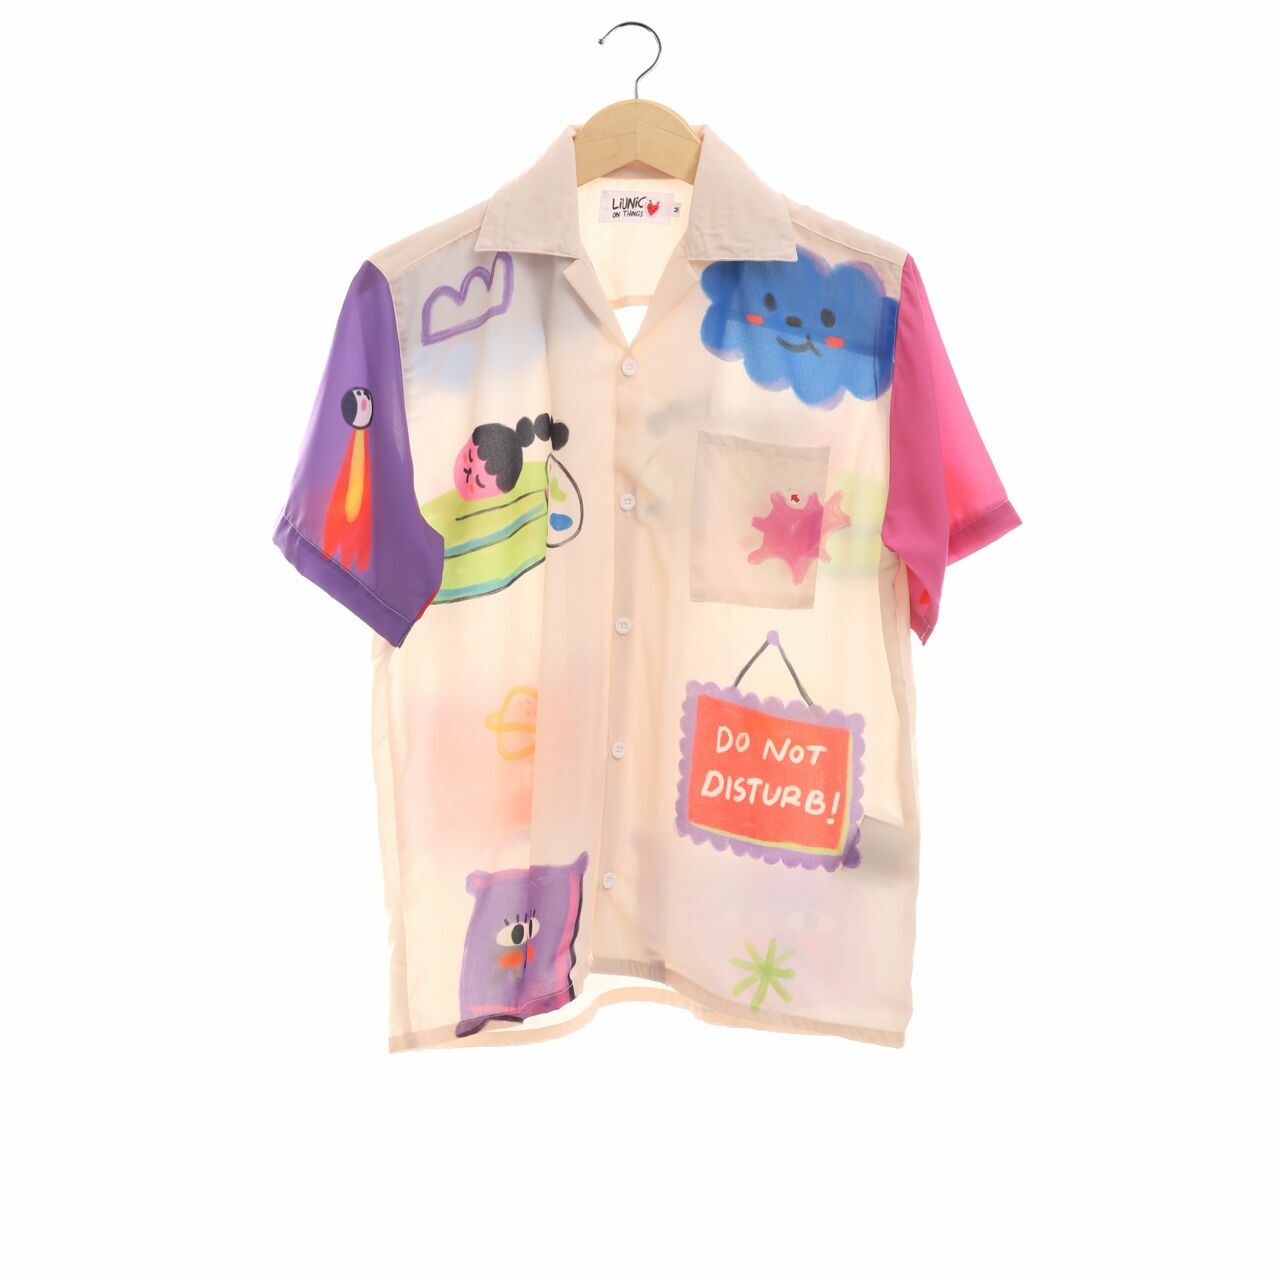 Liunic OnThings Multicolor Patterned Shirt